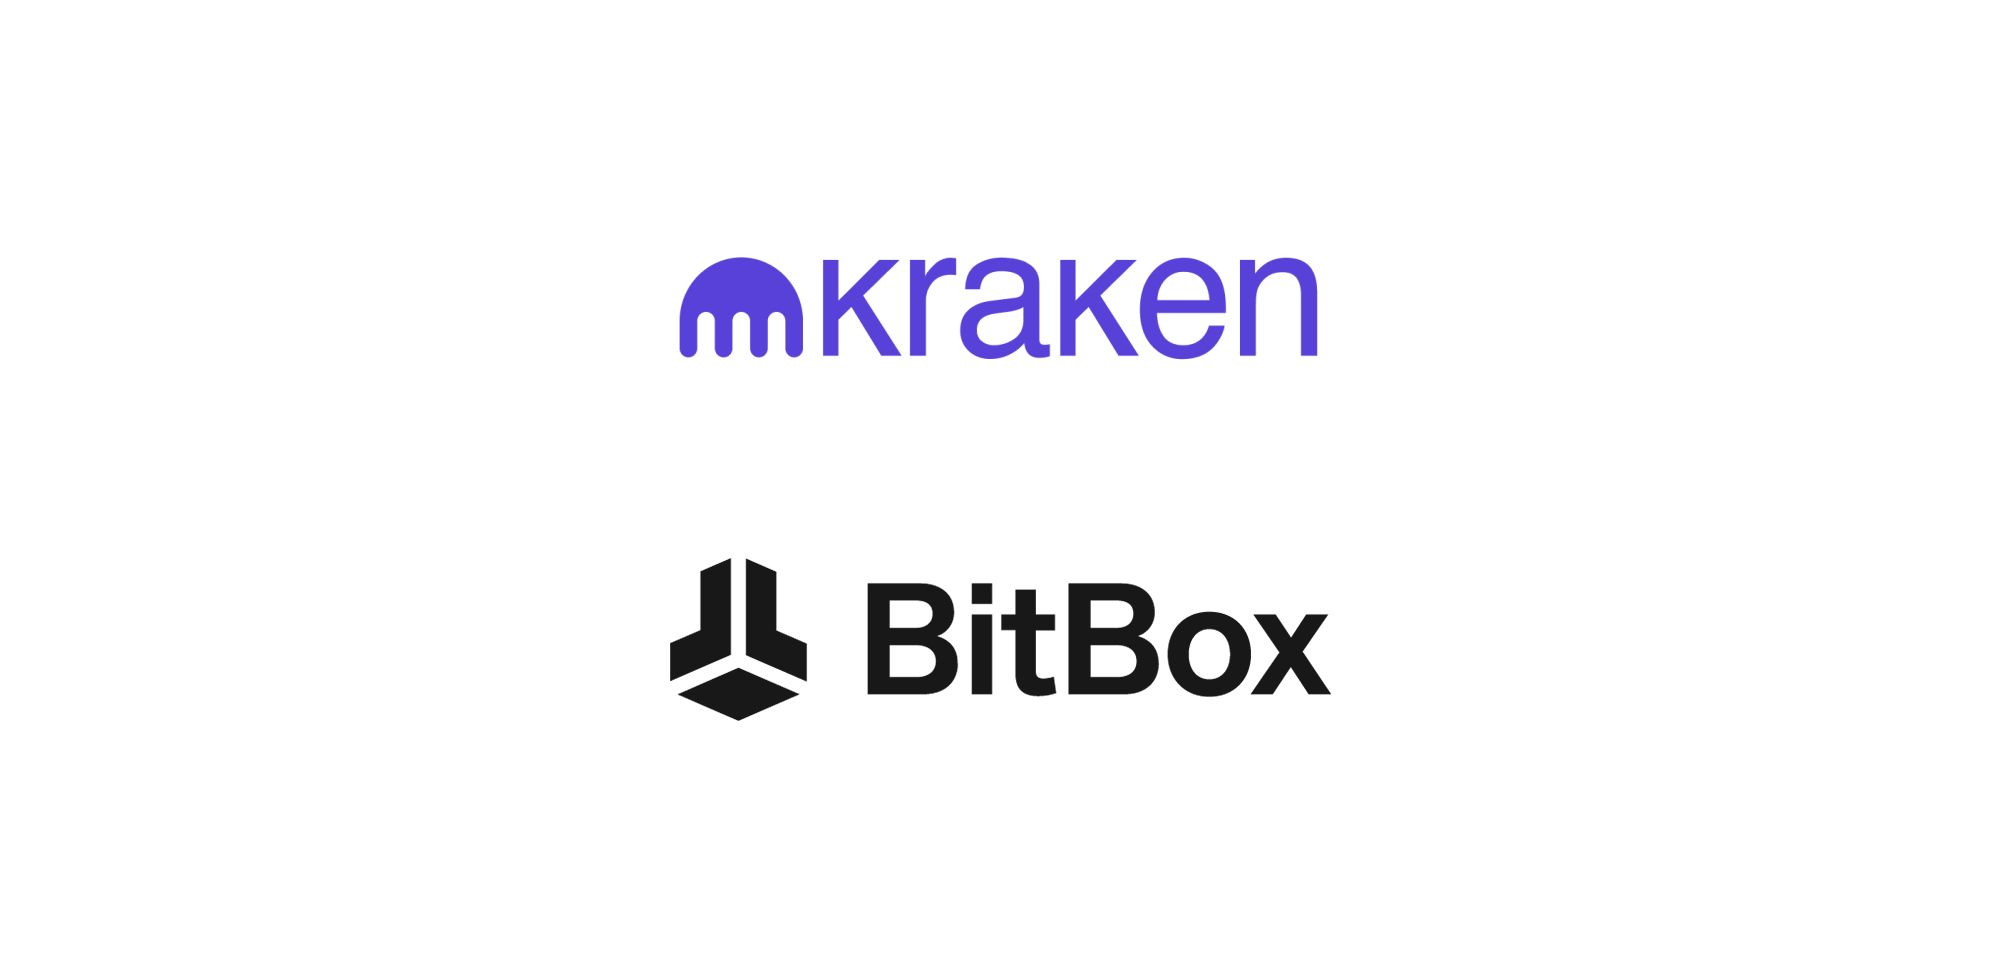 How to withdraw Bitcoin from Kraken.com to your BitBox02